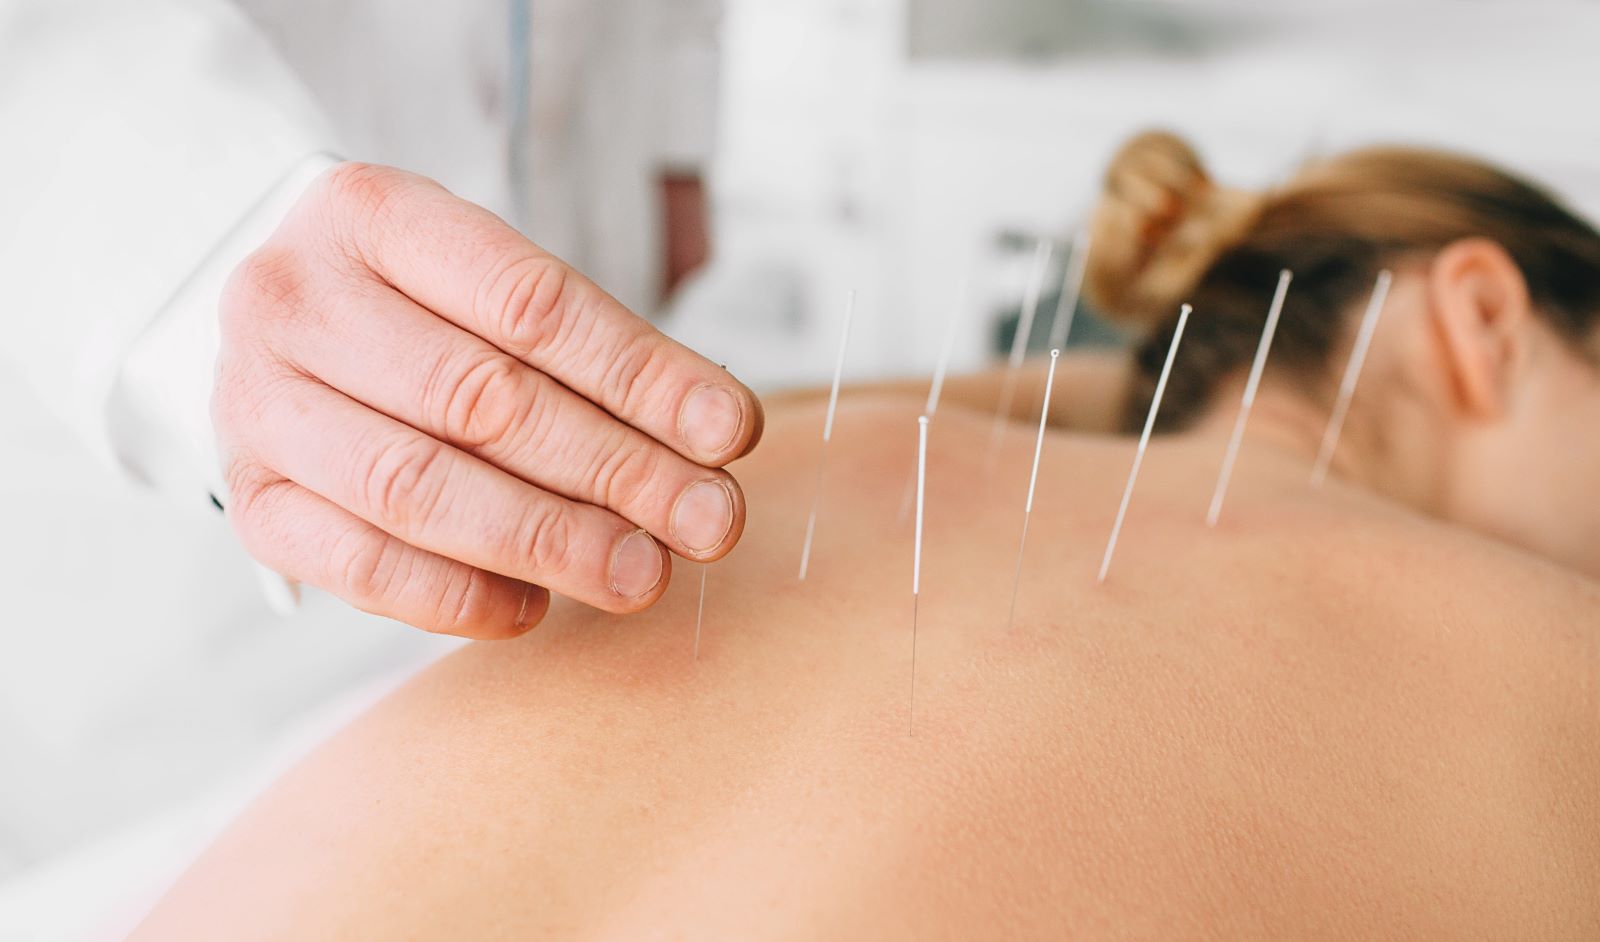 14 Surprising Uses for Acupuncture